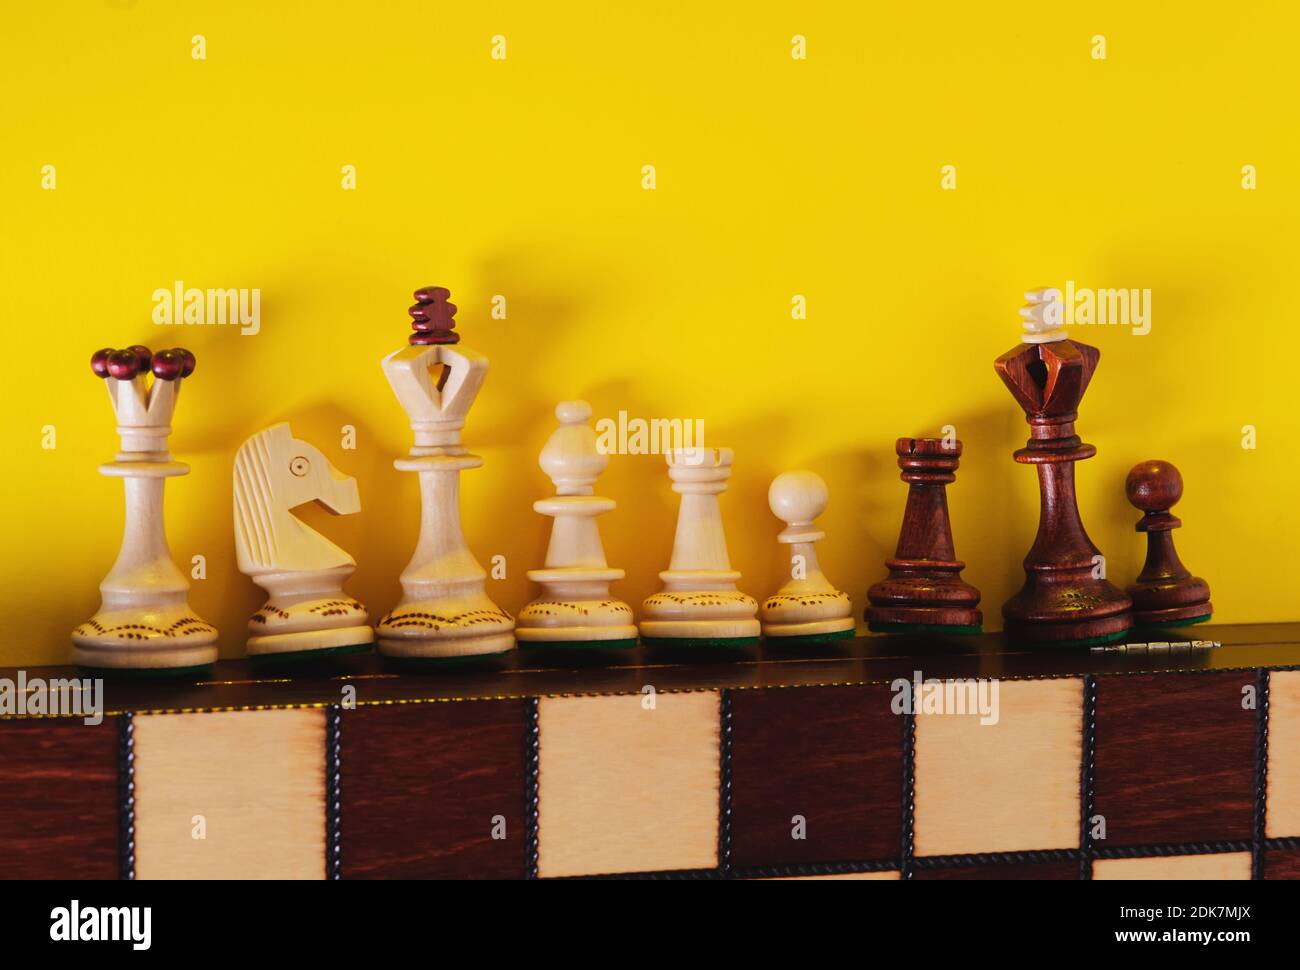 Creative background with wooden board and chess figures. Game for ideas  and strategy. Stock Photo